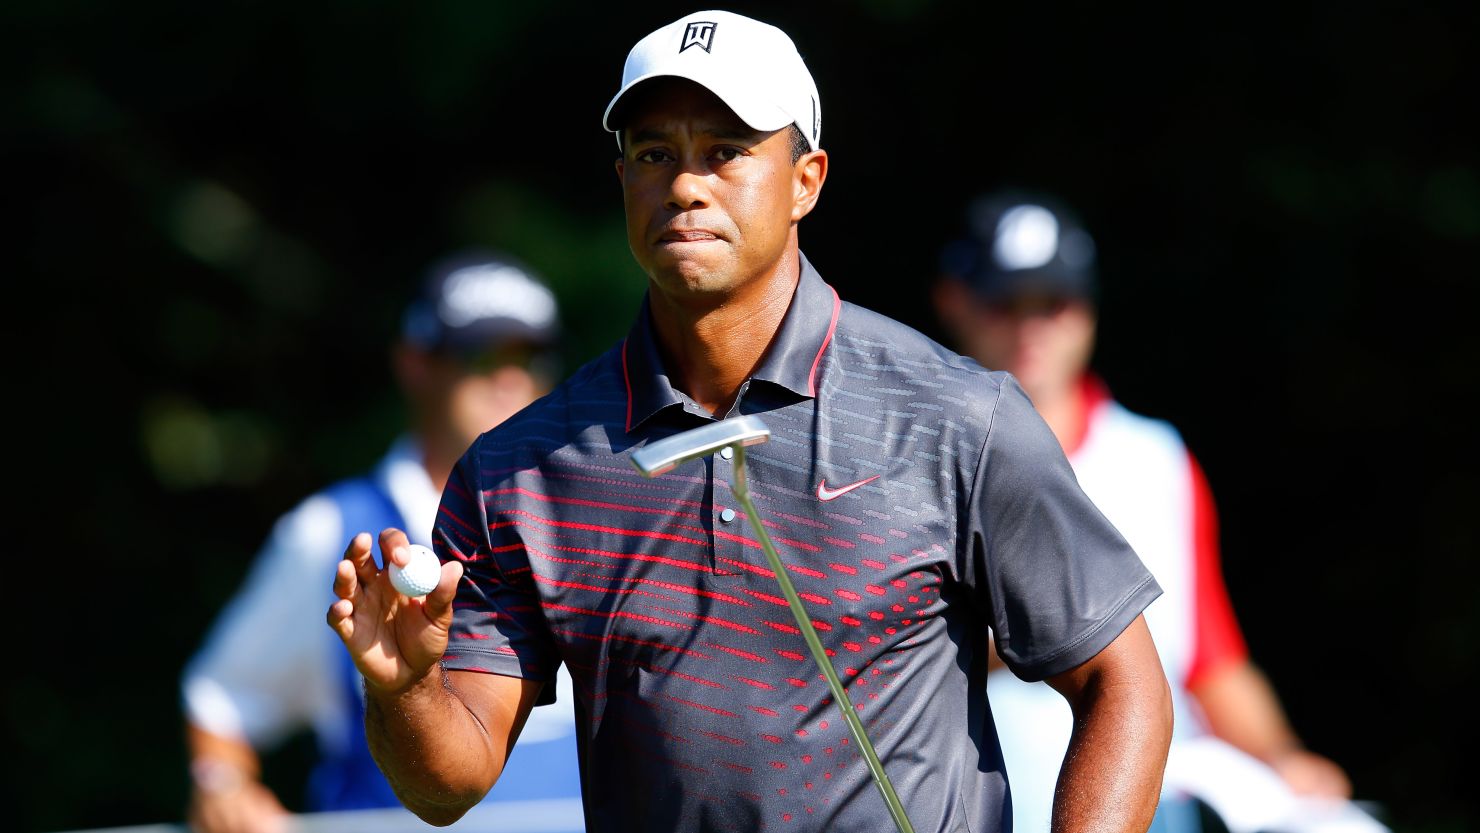 Tiger Woods made an impressive start to the Deutsche Bank Championship in Massachusetts on Friday 